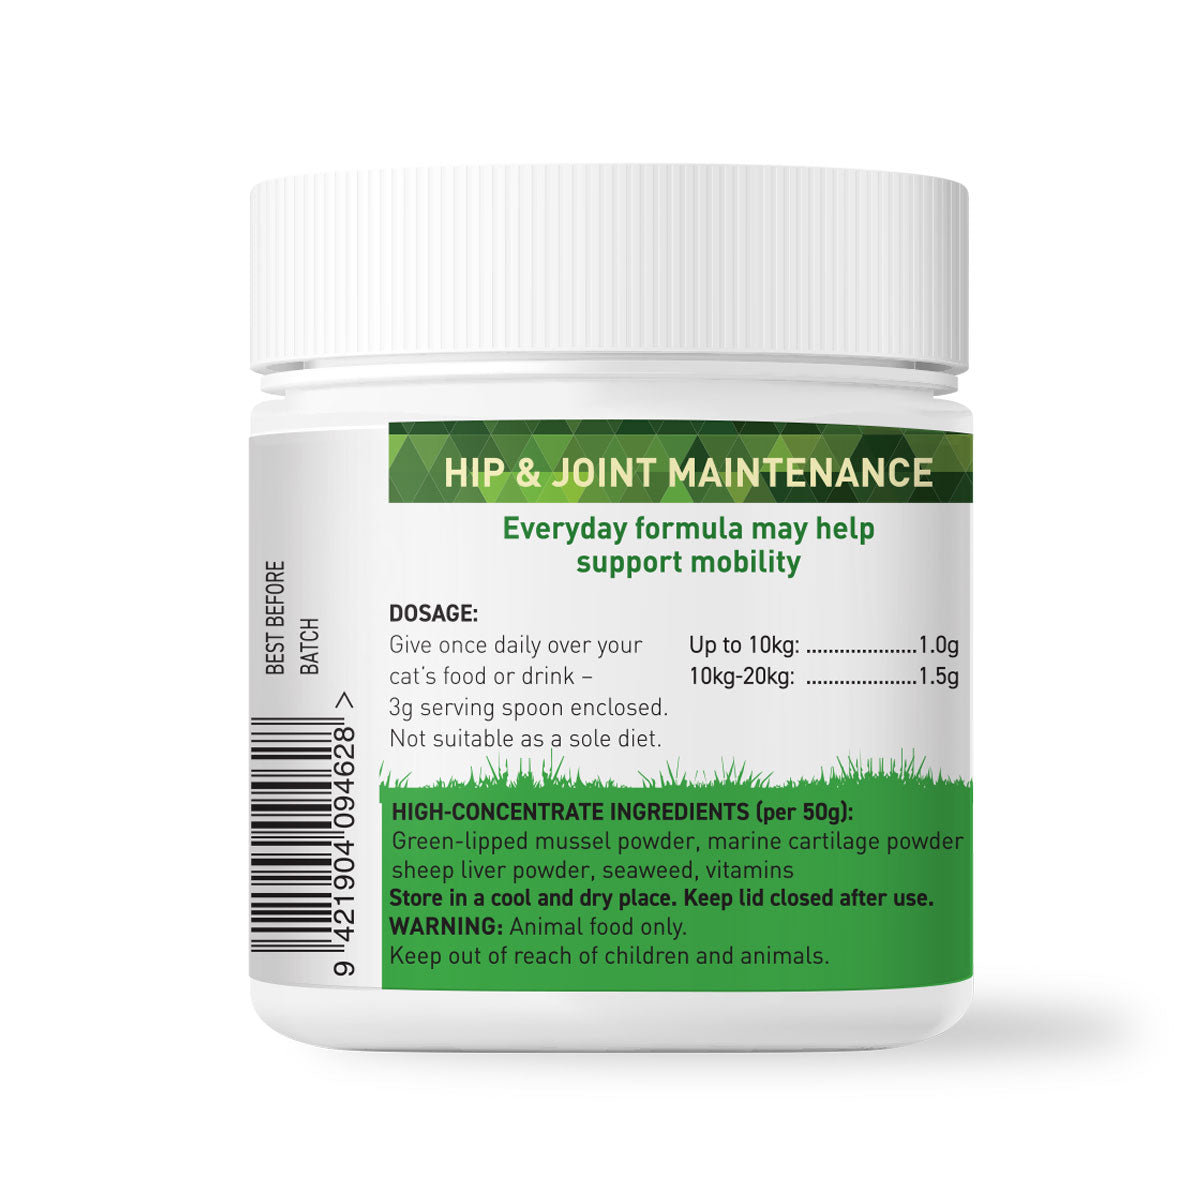 Nutreats Vitals Hip & Joint Powder for healthy hips and joints. Everyday formula supporting your cat's mobility, healthy joints and shiny coat. Rich in Omega-3 with green-lipped mussel powder.